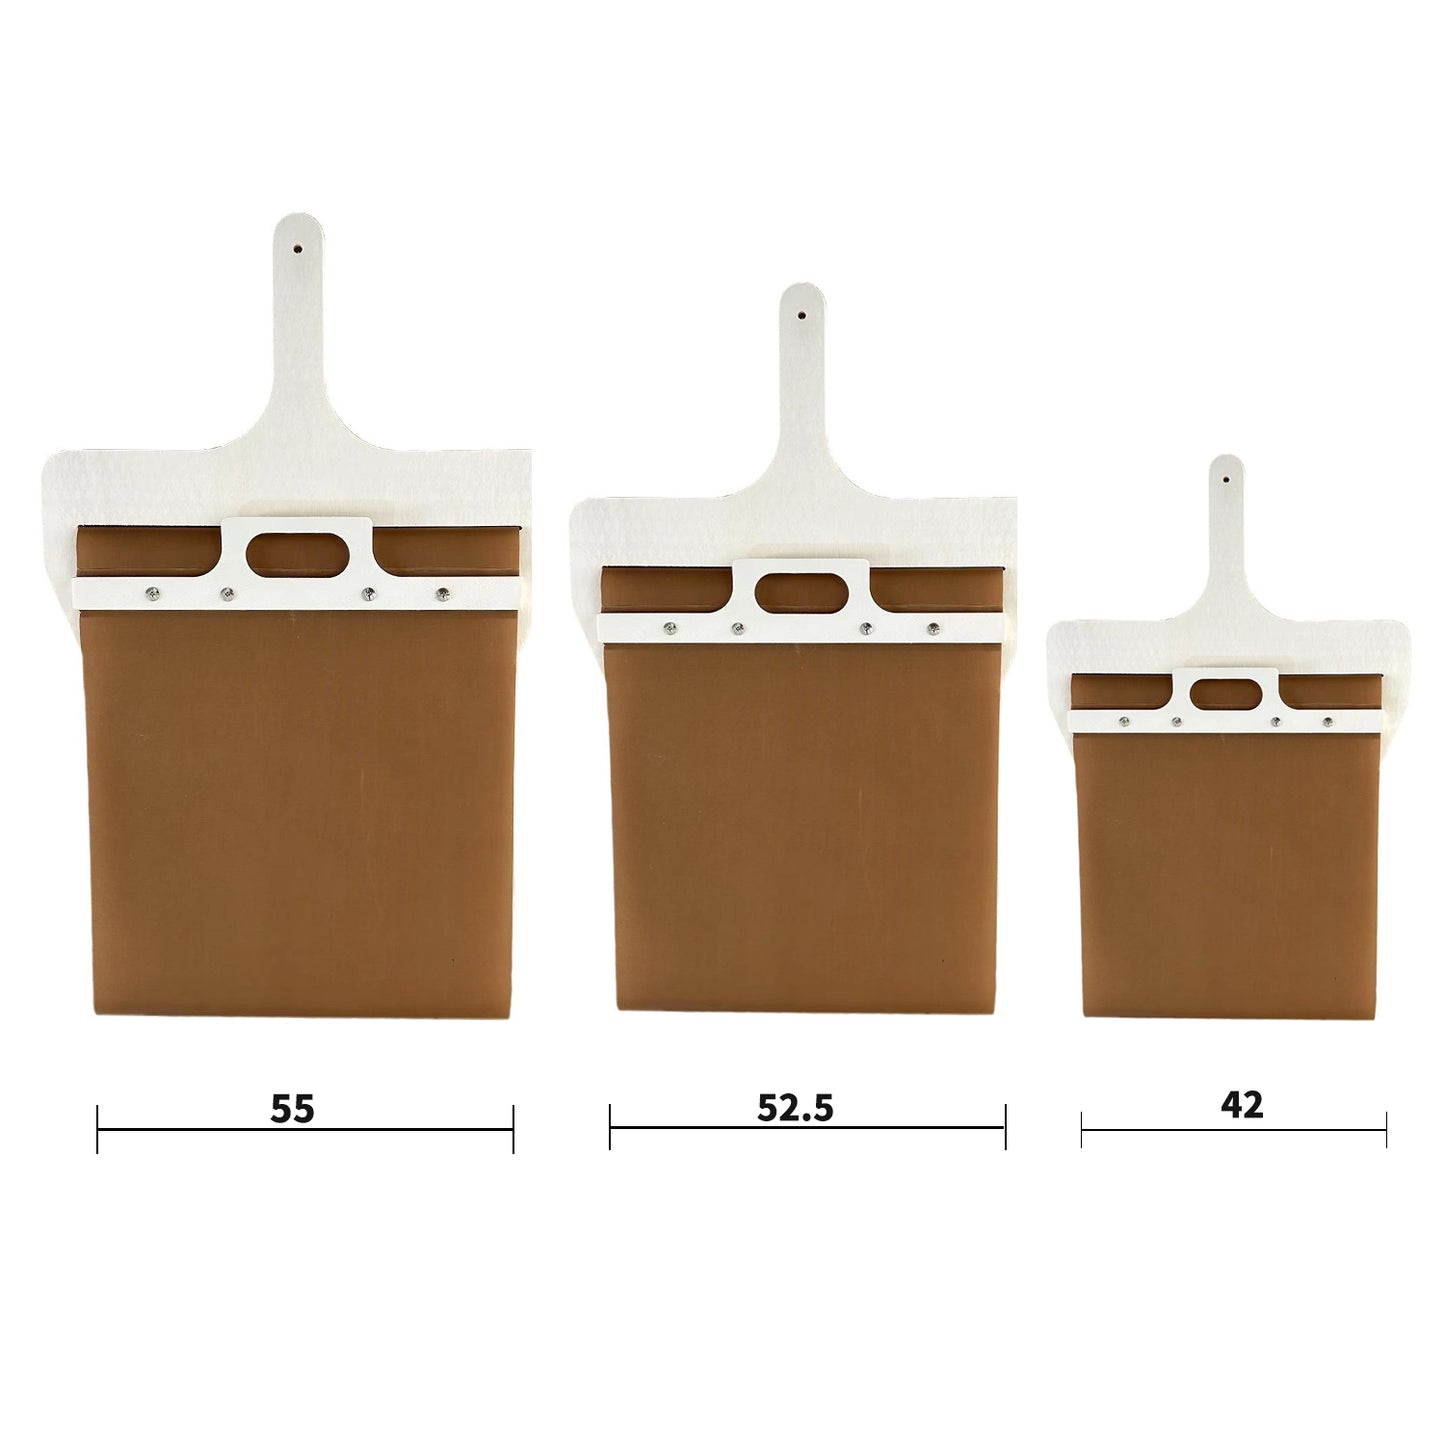 Three-Sized Pizza Paddle Set: Displayed are three pizza paddles, varying in size to cater to all baking needs. They are ideal for transferring pizzas, showcasing their versatility in accommodating different-sized baked delights.